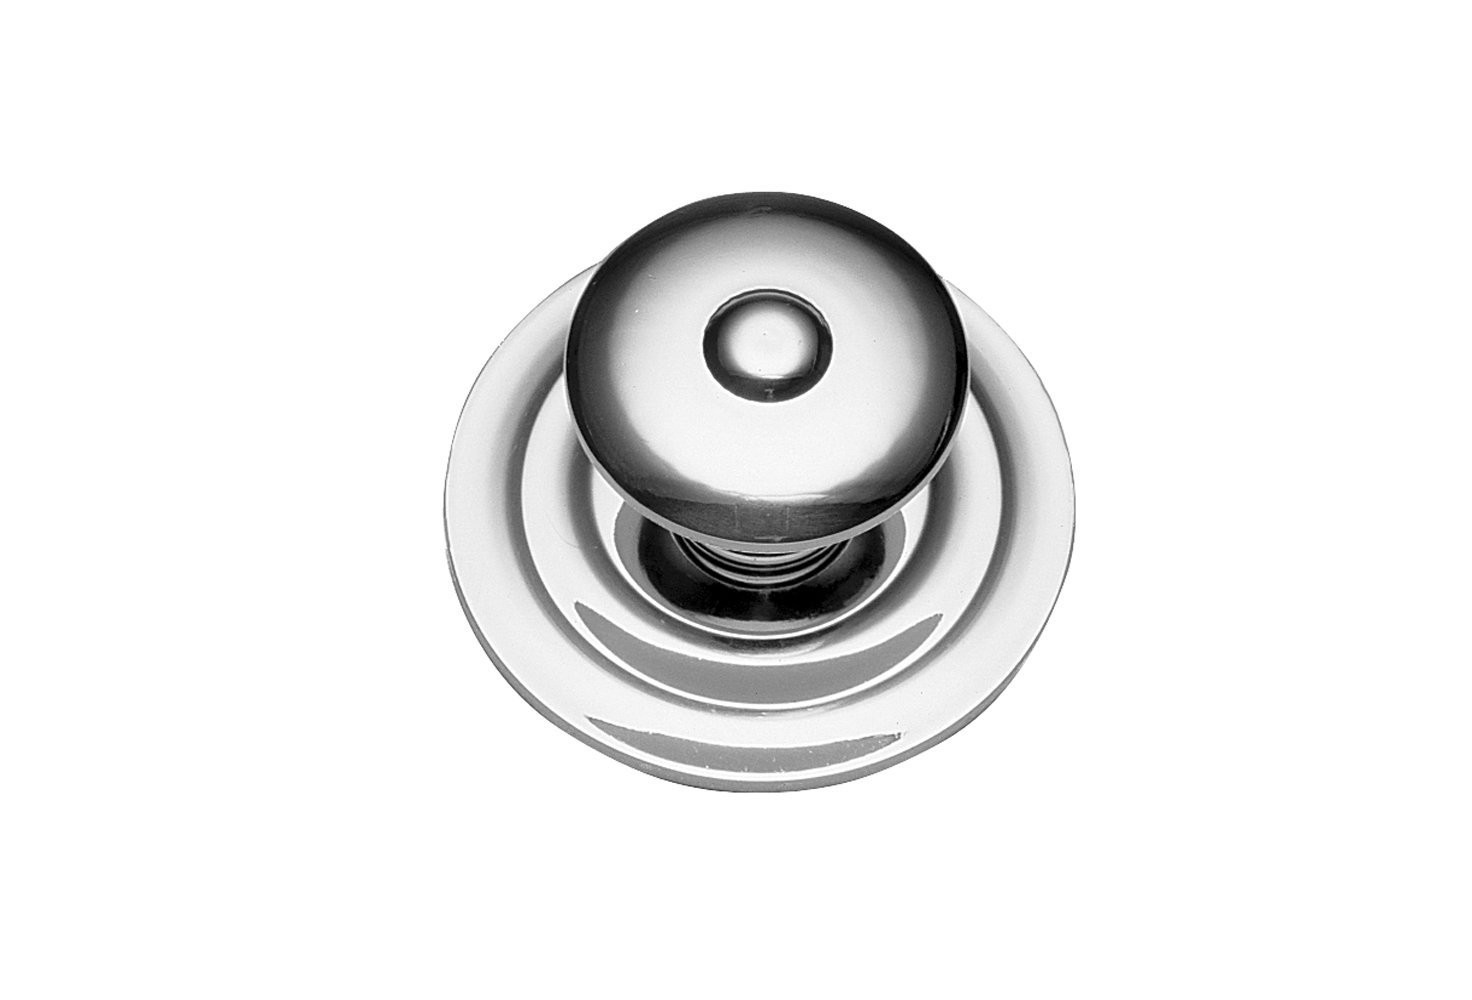 PHYLRICH 1022487 GEORGETOWN AND MARQUIS 1 1/8 INCH ROUND CABINET KNOB